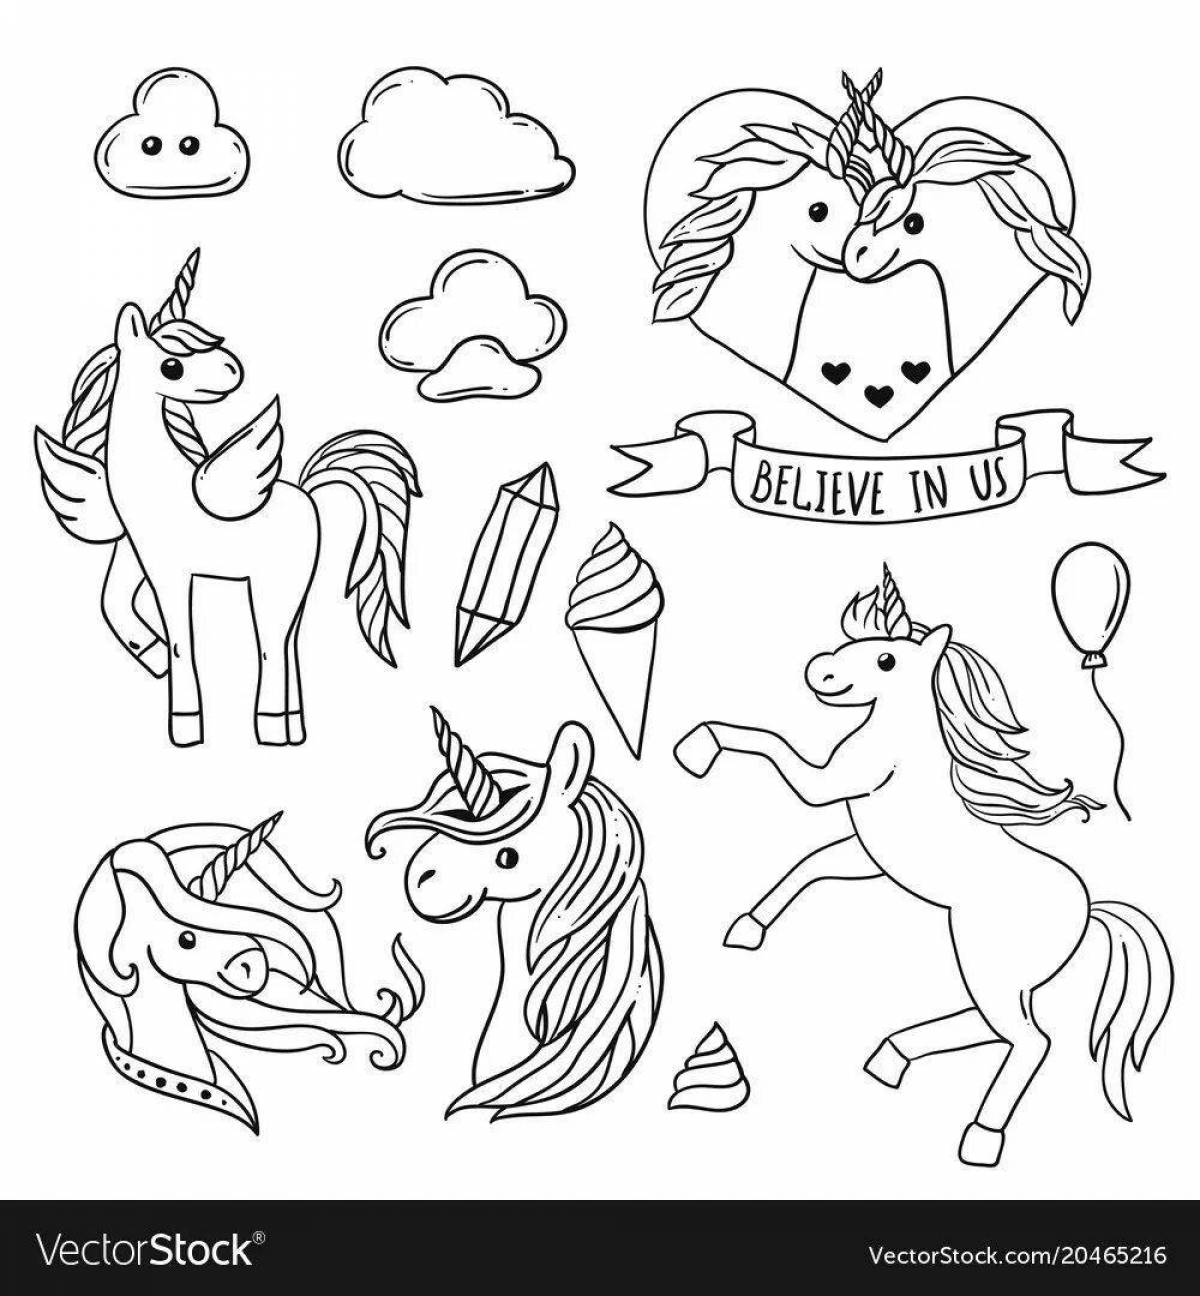 Fantastic coloring book with lots of unicorns